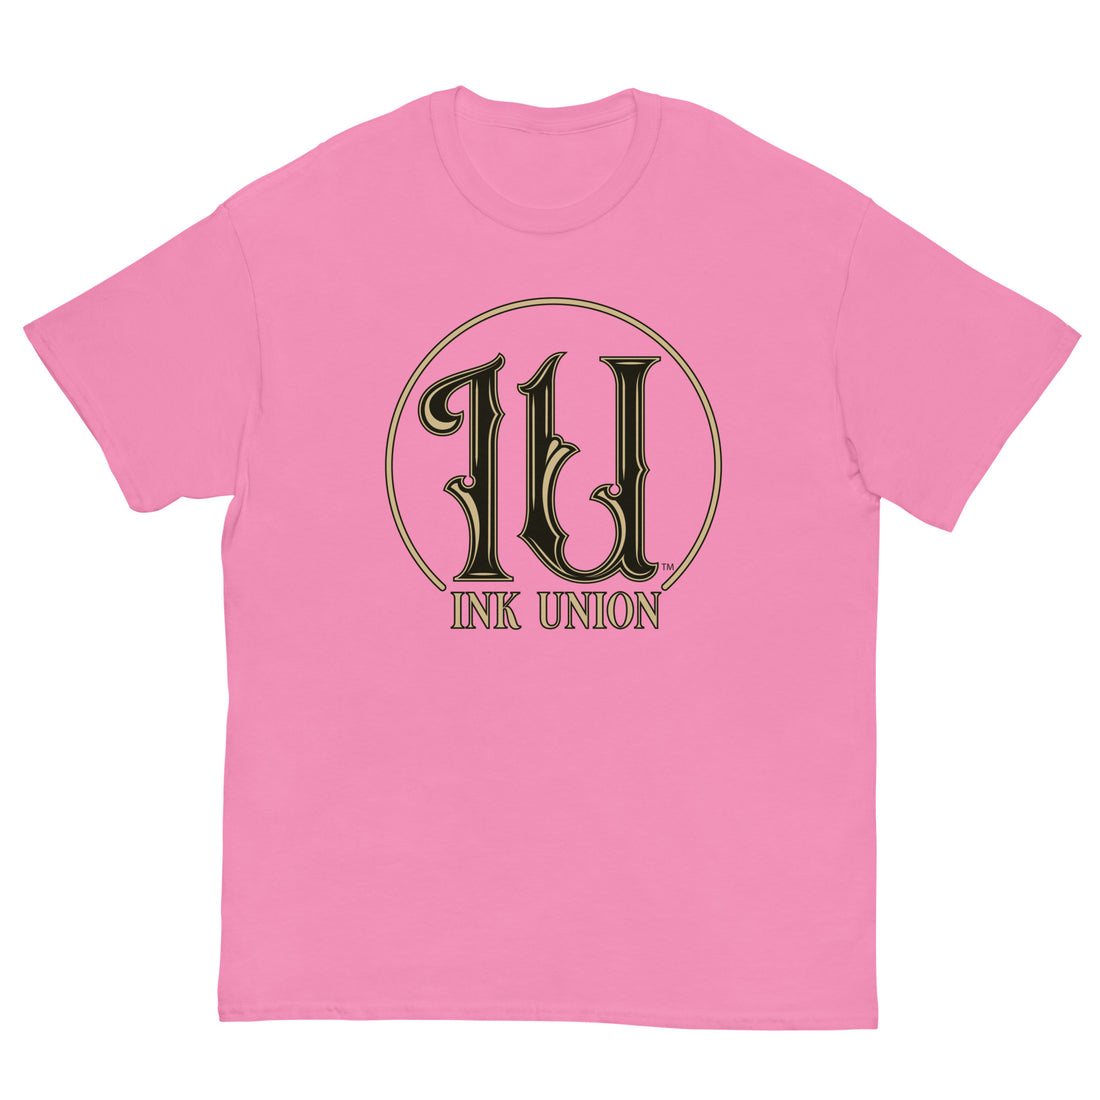 Ink Union Clothing Co. pink t-shirt featuring the Ink Union ring logo in black and gold.